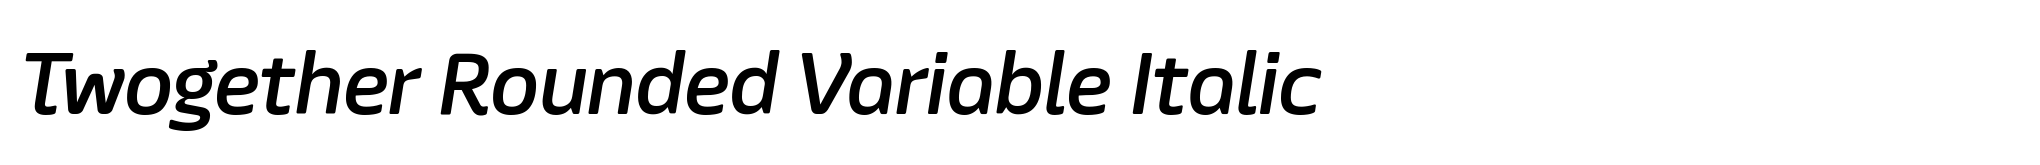 Twogether Rounded Variable Italic image